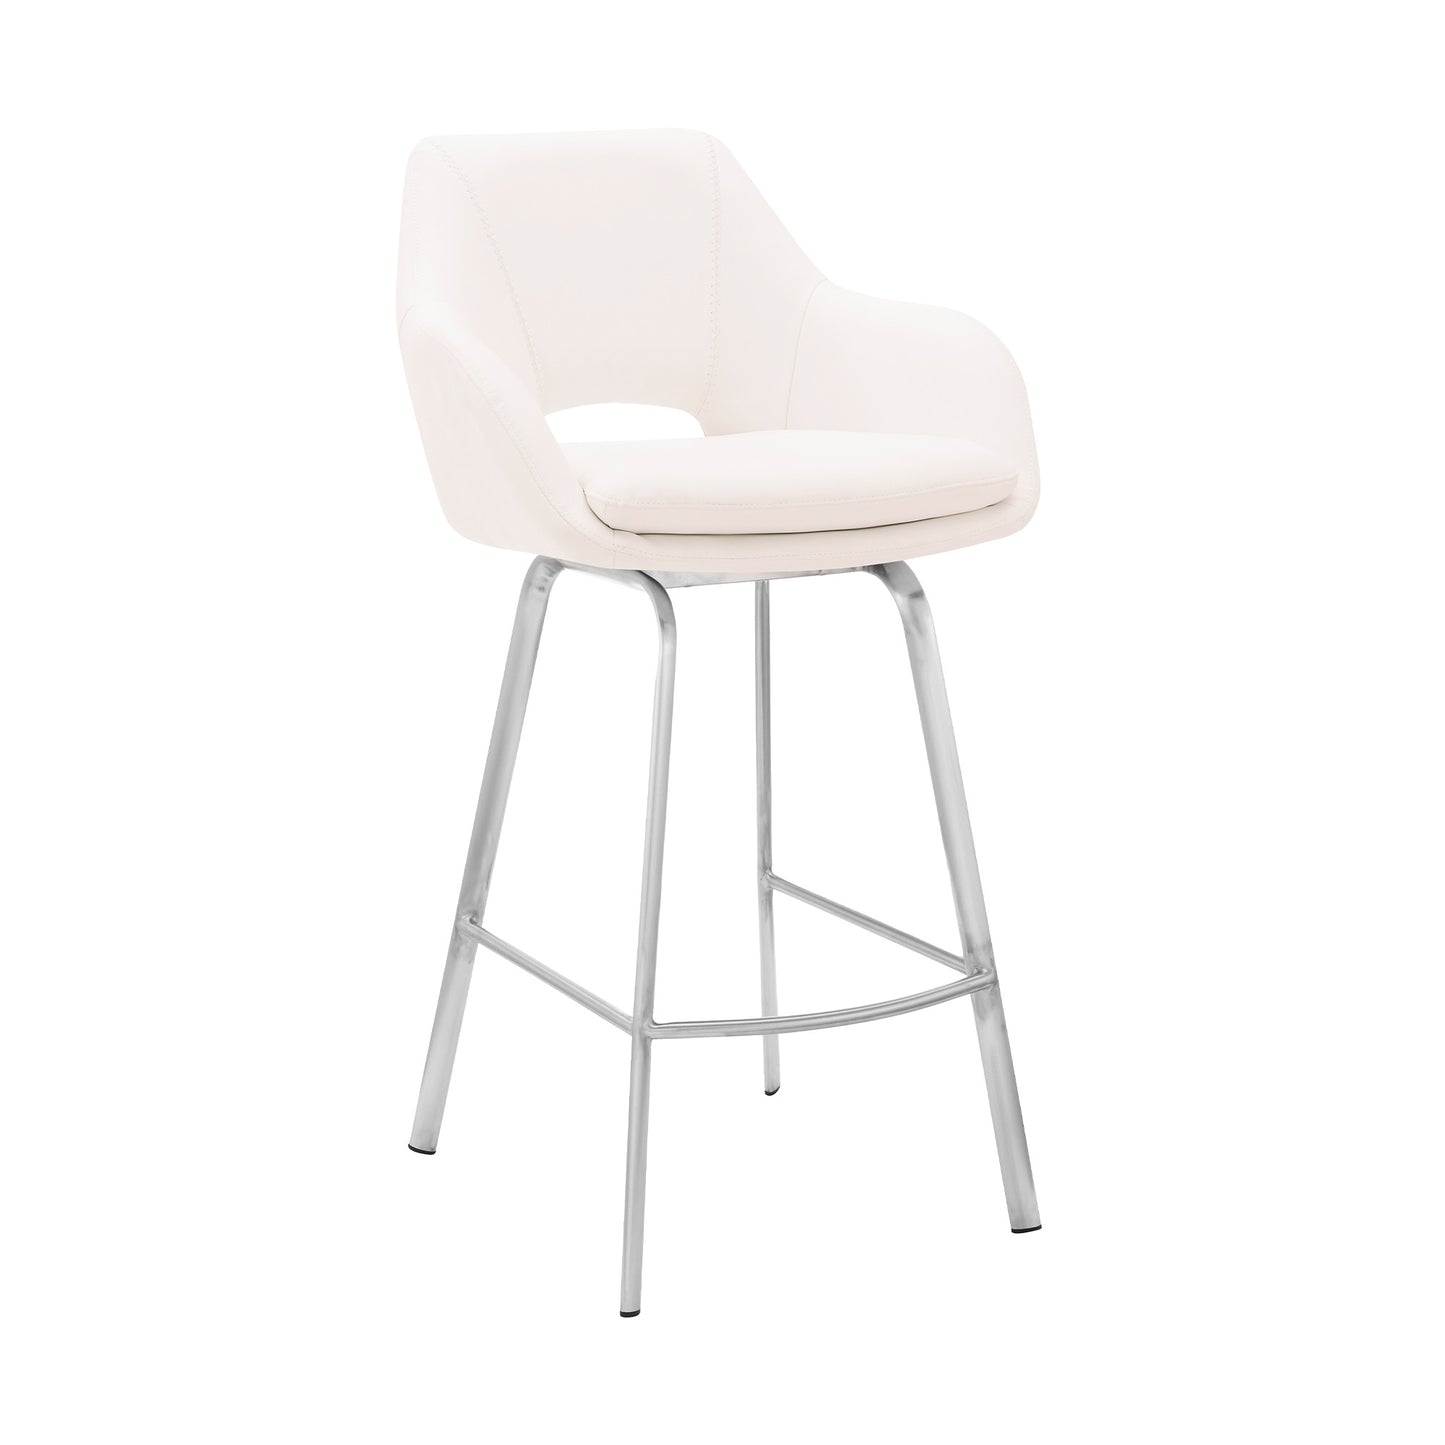 30" White Faux Leather and Stainless Steel Bar Stool By Homeroots